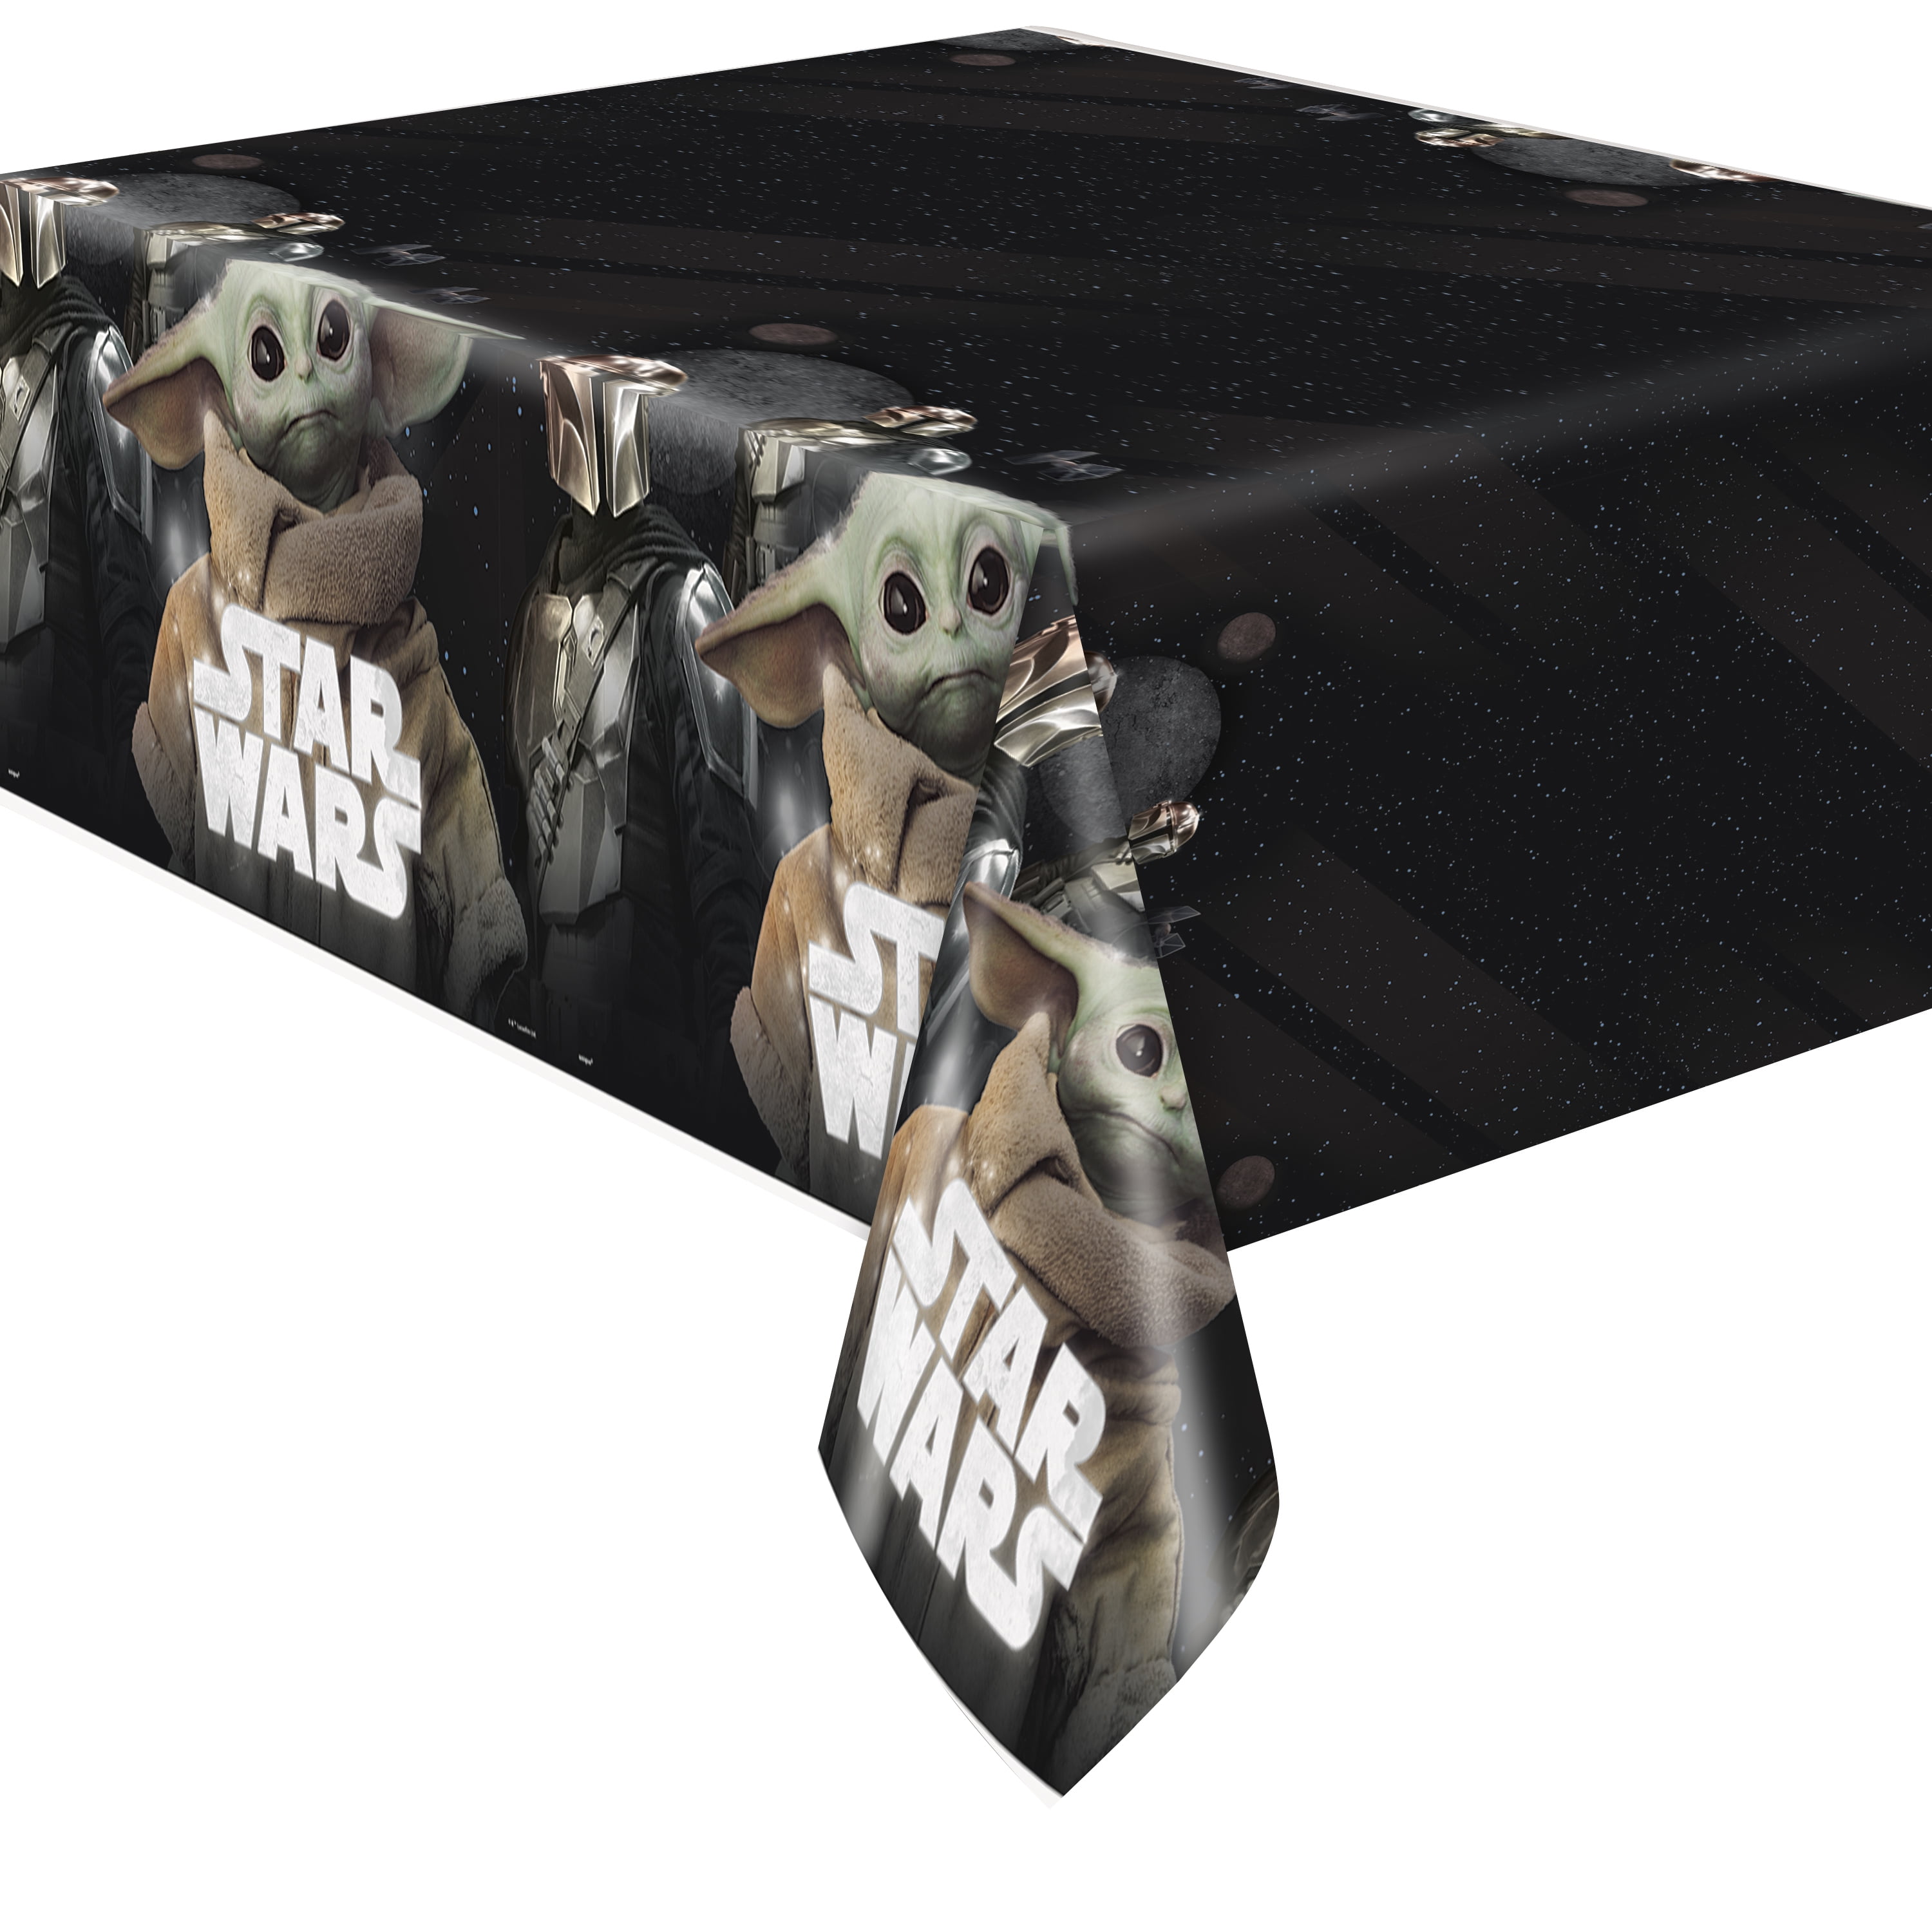 New Star Wars 8 The Last Jedi Kids Birthday Party Tablecloth 54in x 96 in